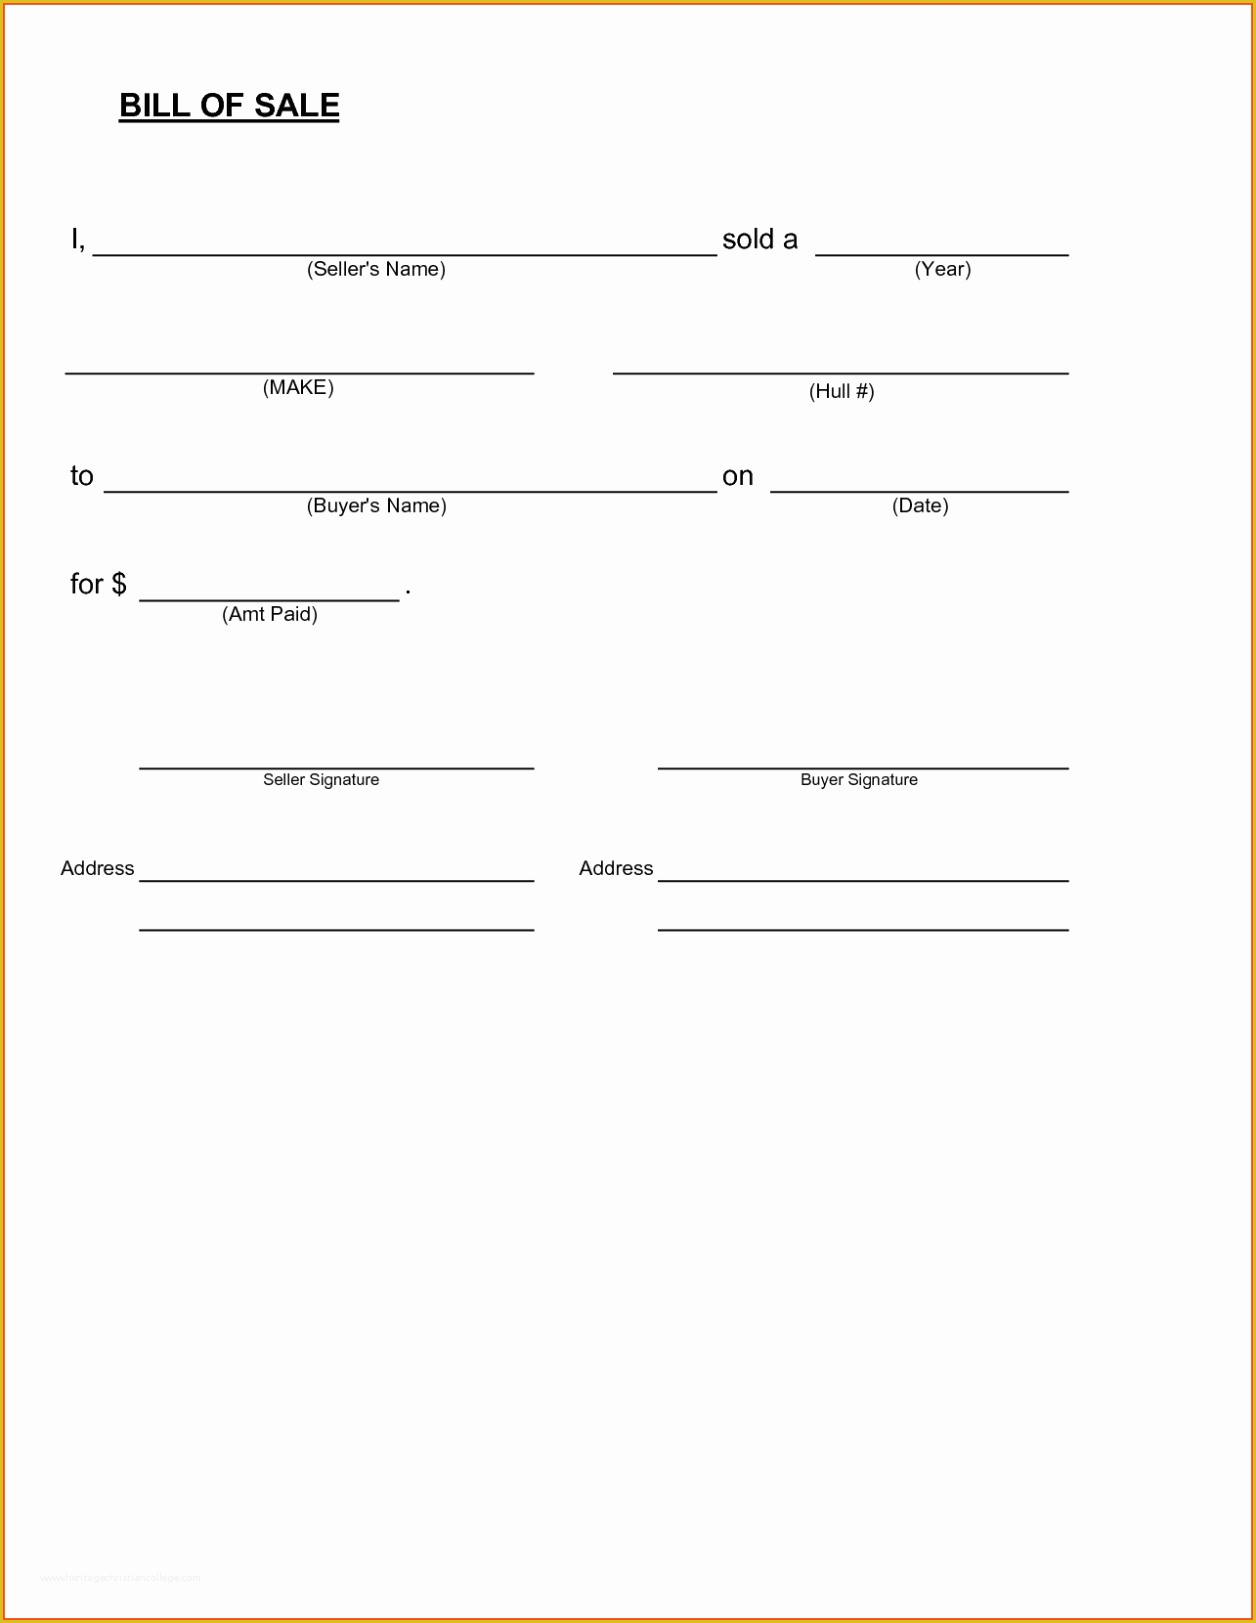 Free Bill Of Sale Template Word Of Sample Bill Of Sale form for Car Printable